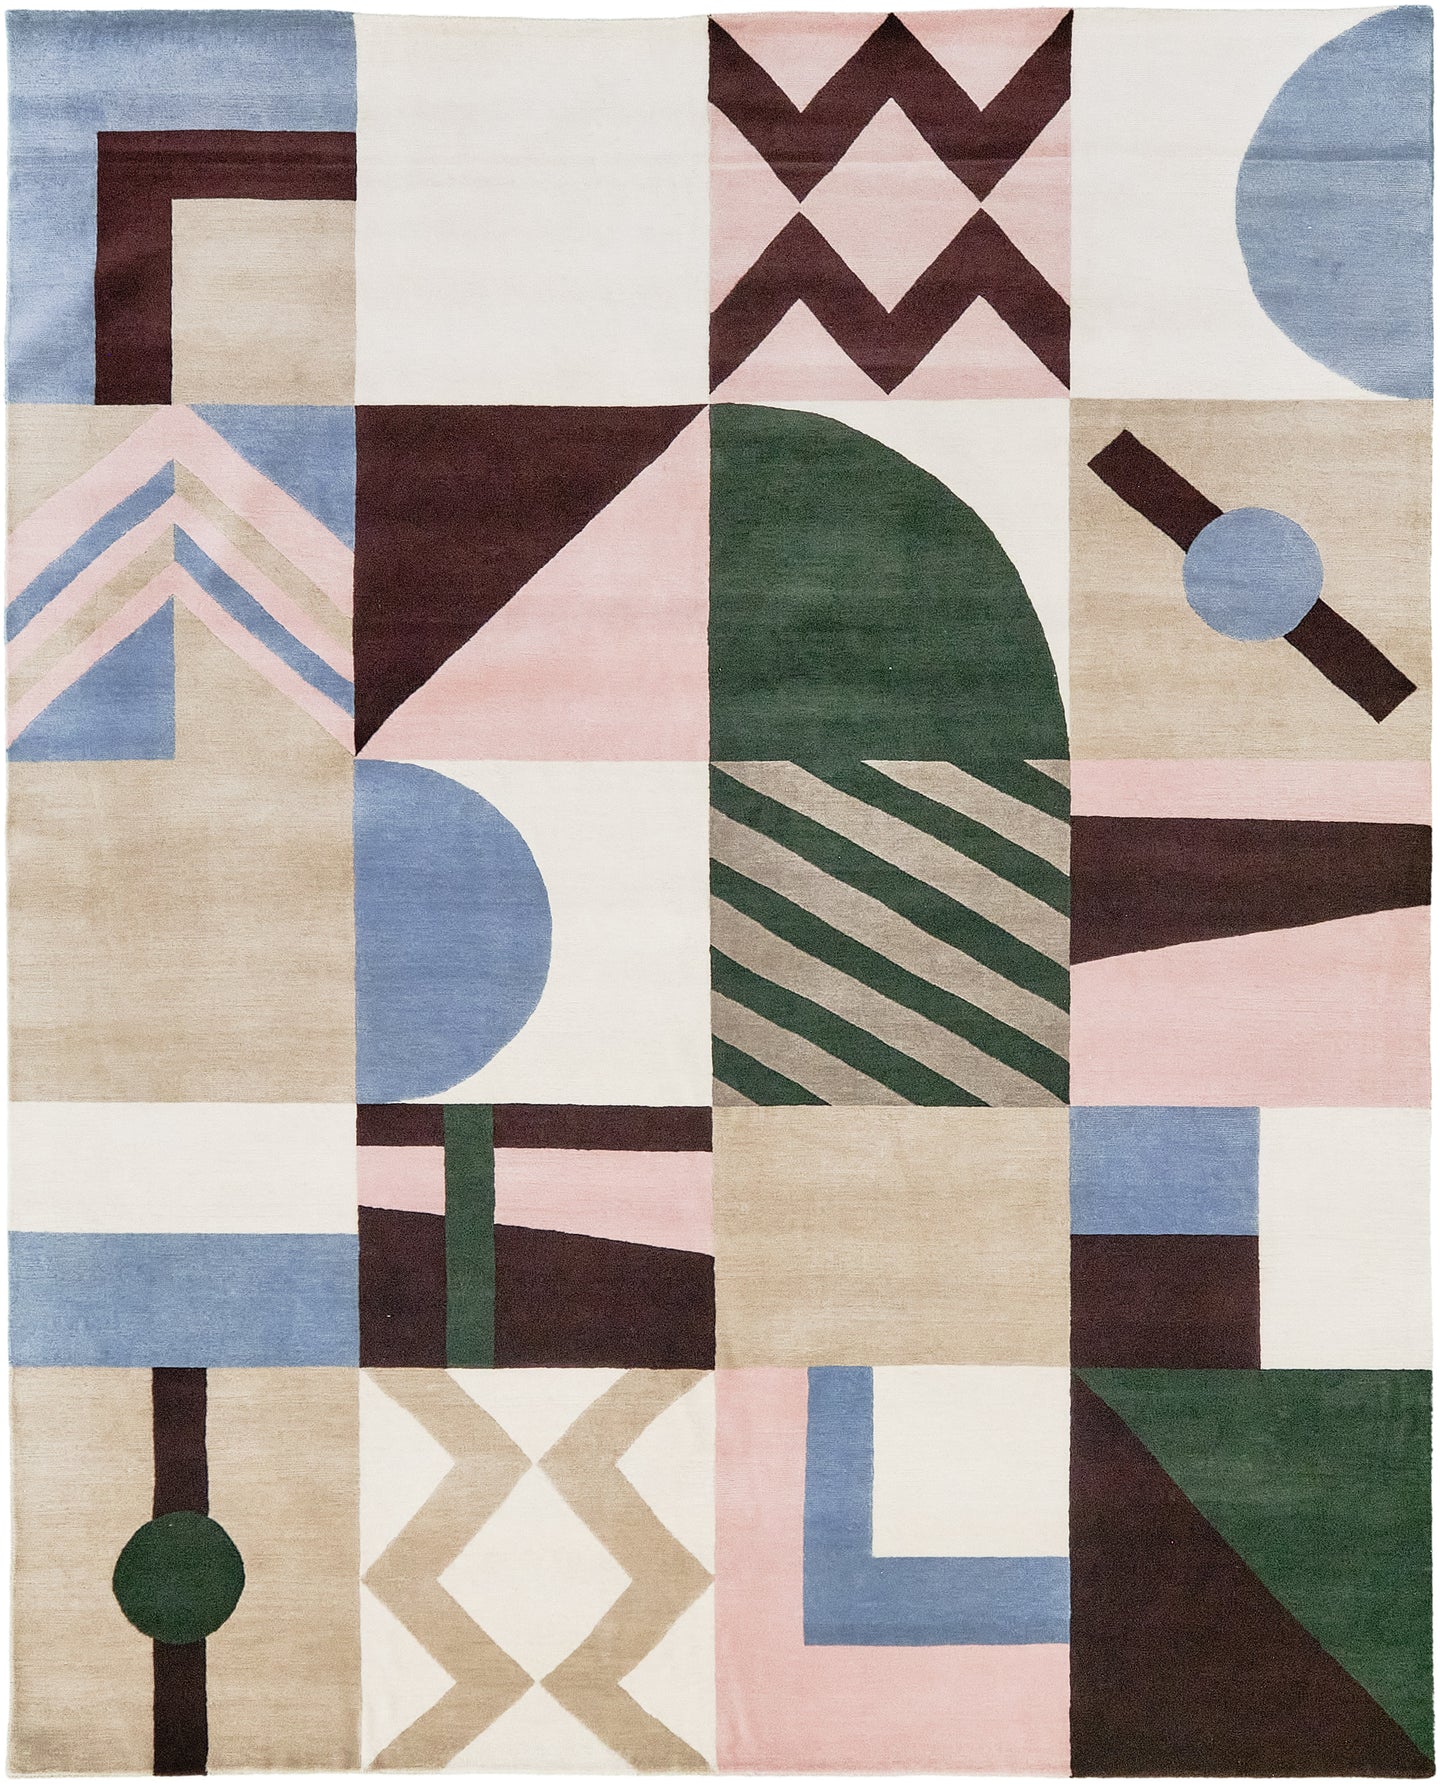 Modern Rug Image 9202 Pazzo, Baci Collection by Citizen Artist